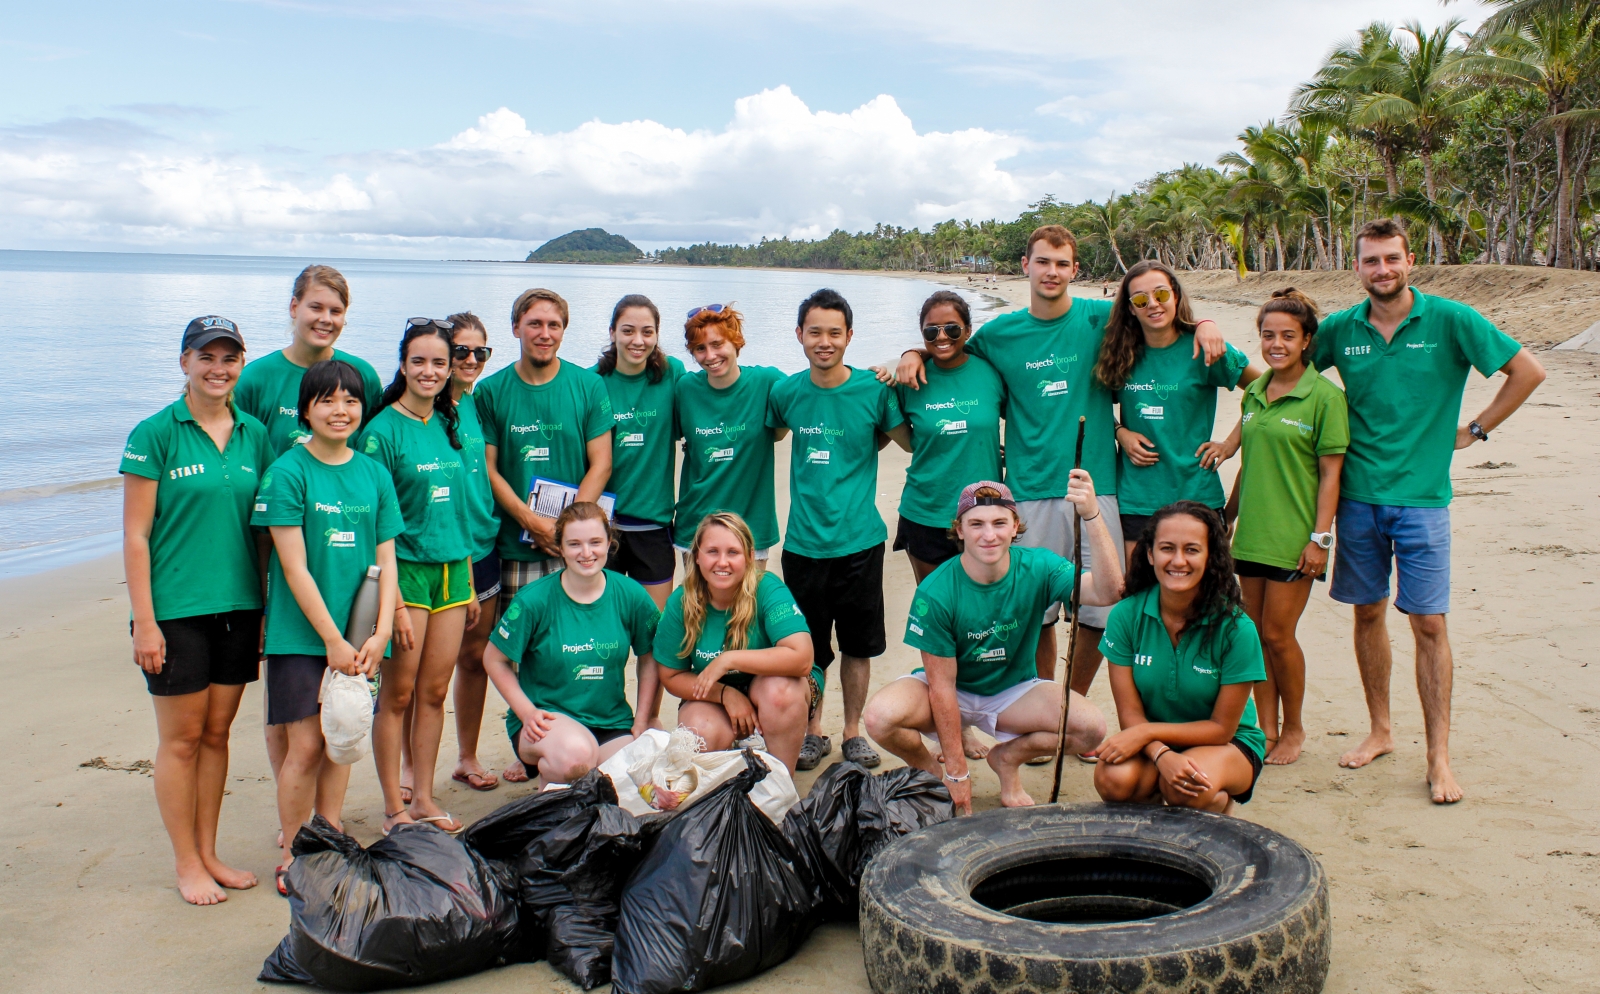 A group of Projects Abroad volunteers assist with a beach clean-up initiative where no experience is needed to volunteer overseas.